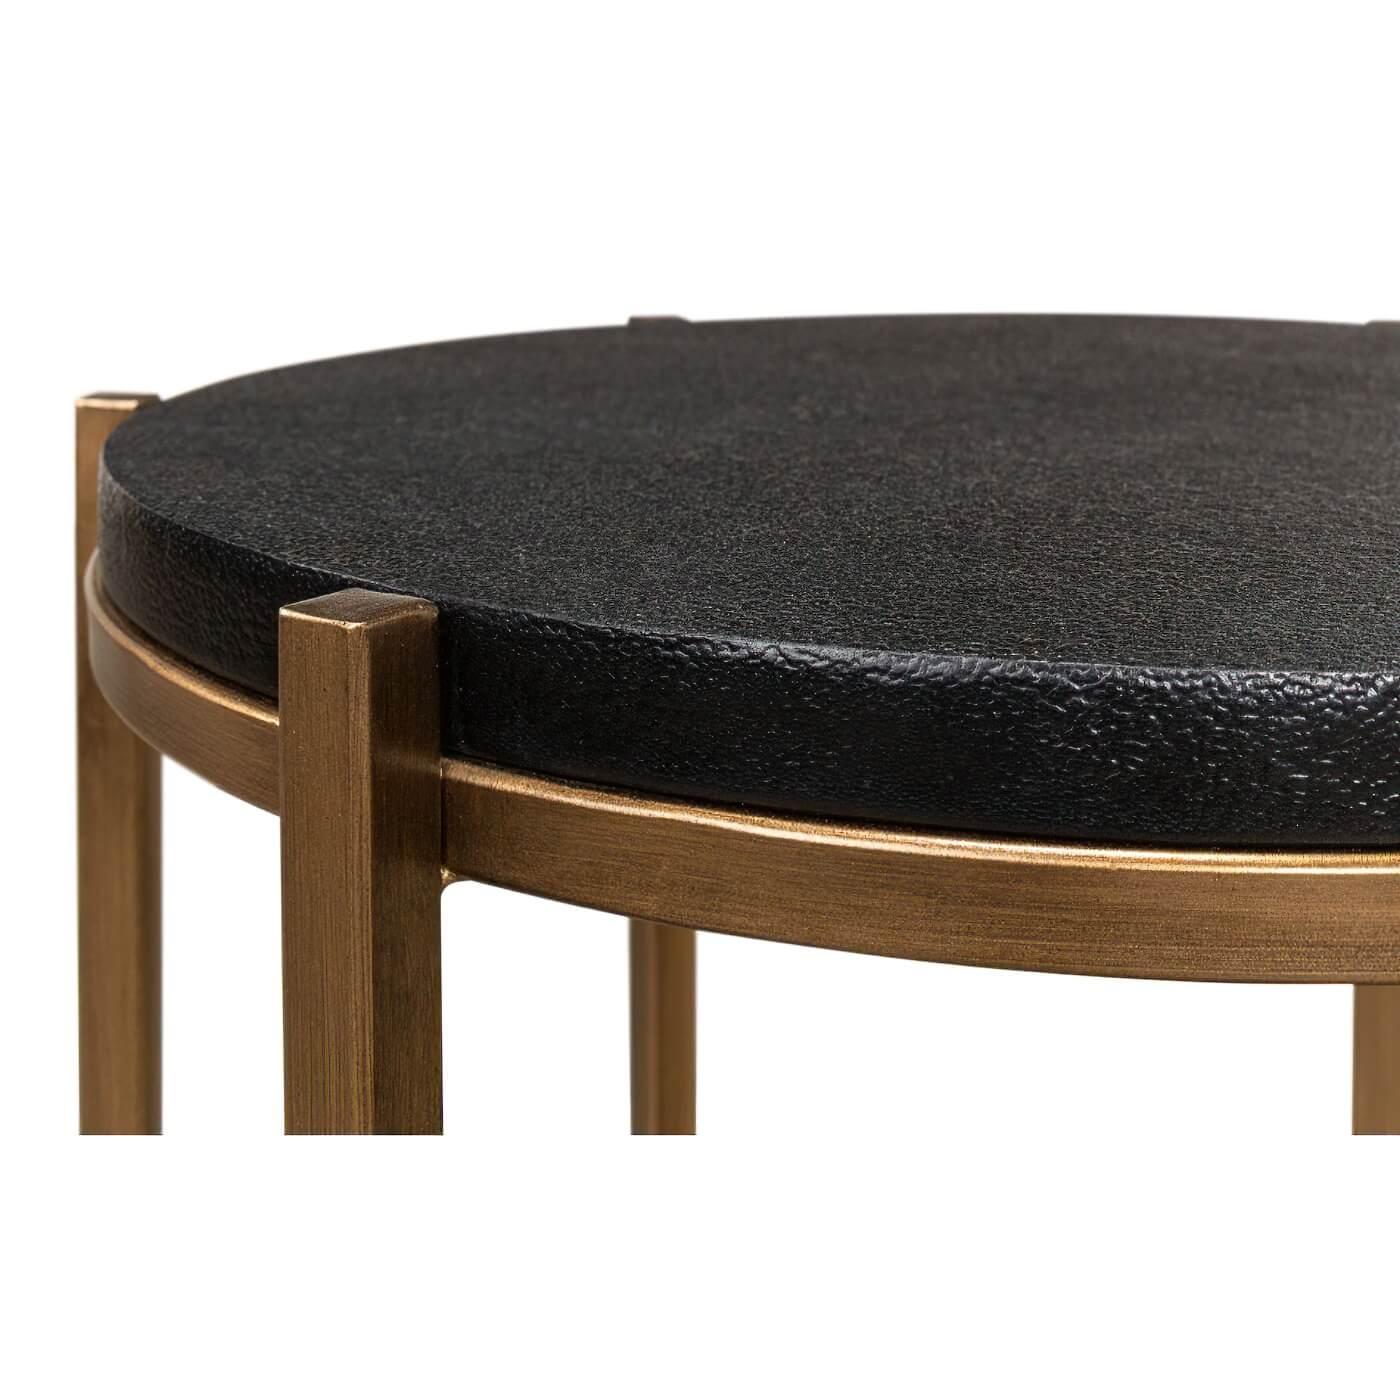 Modern leather top accent table with leather-wrapped round top supported by a six-legged gilt metal base with a stretcher.

Dimensions: 16